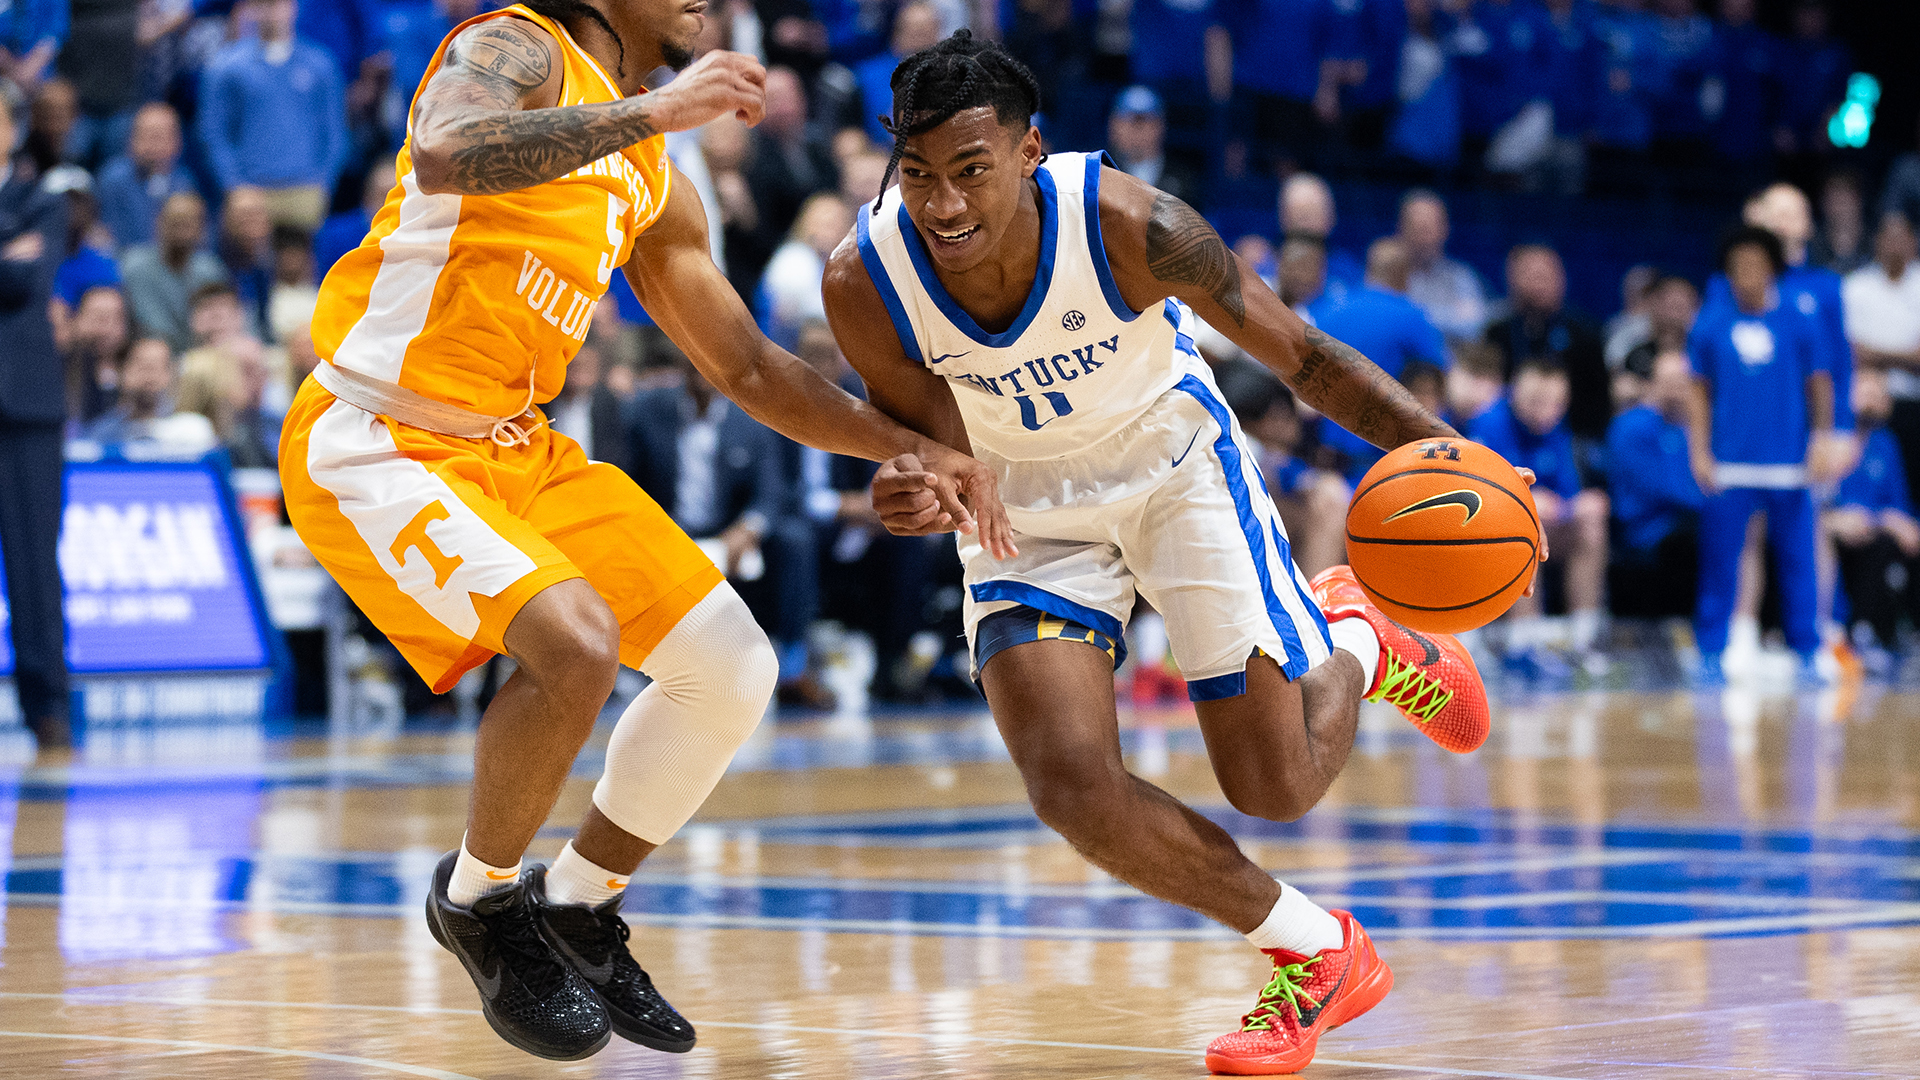 Kentucky-Tennessee Men's Basketball Postgame Quotes